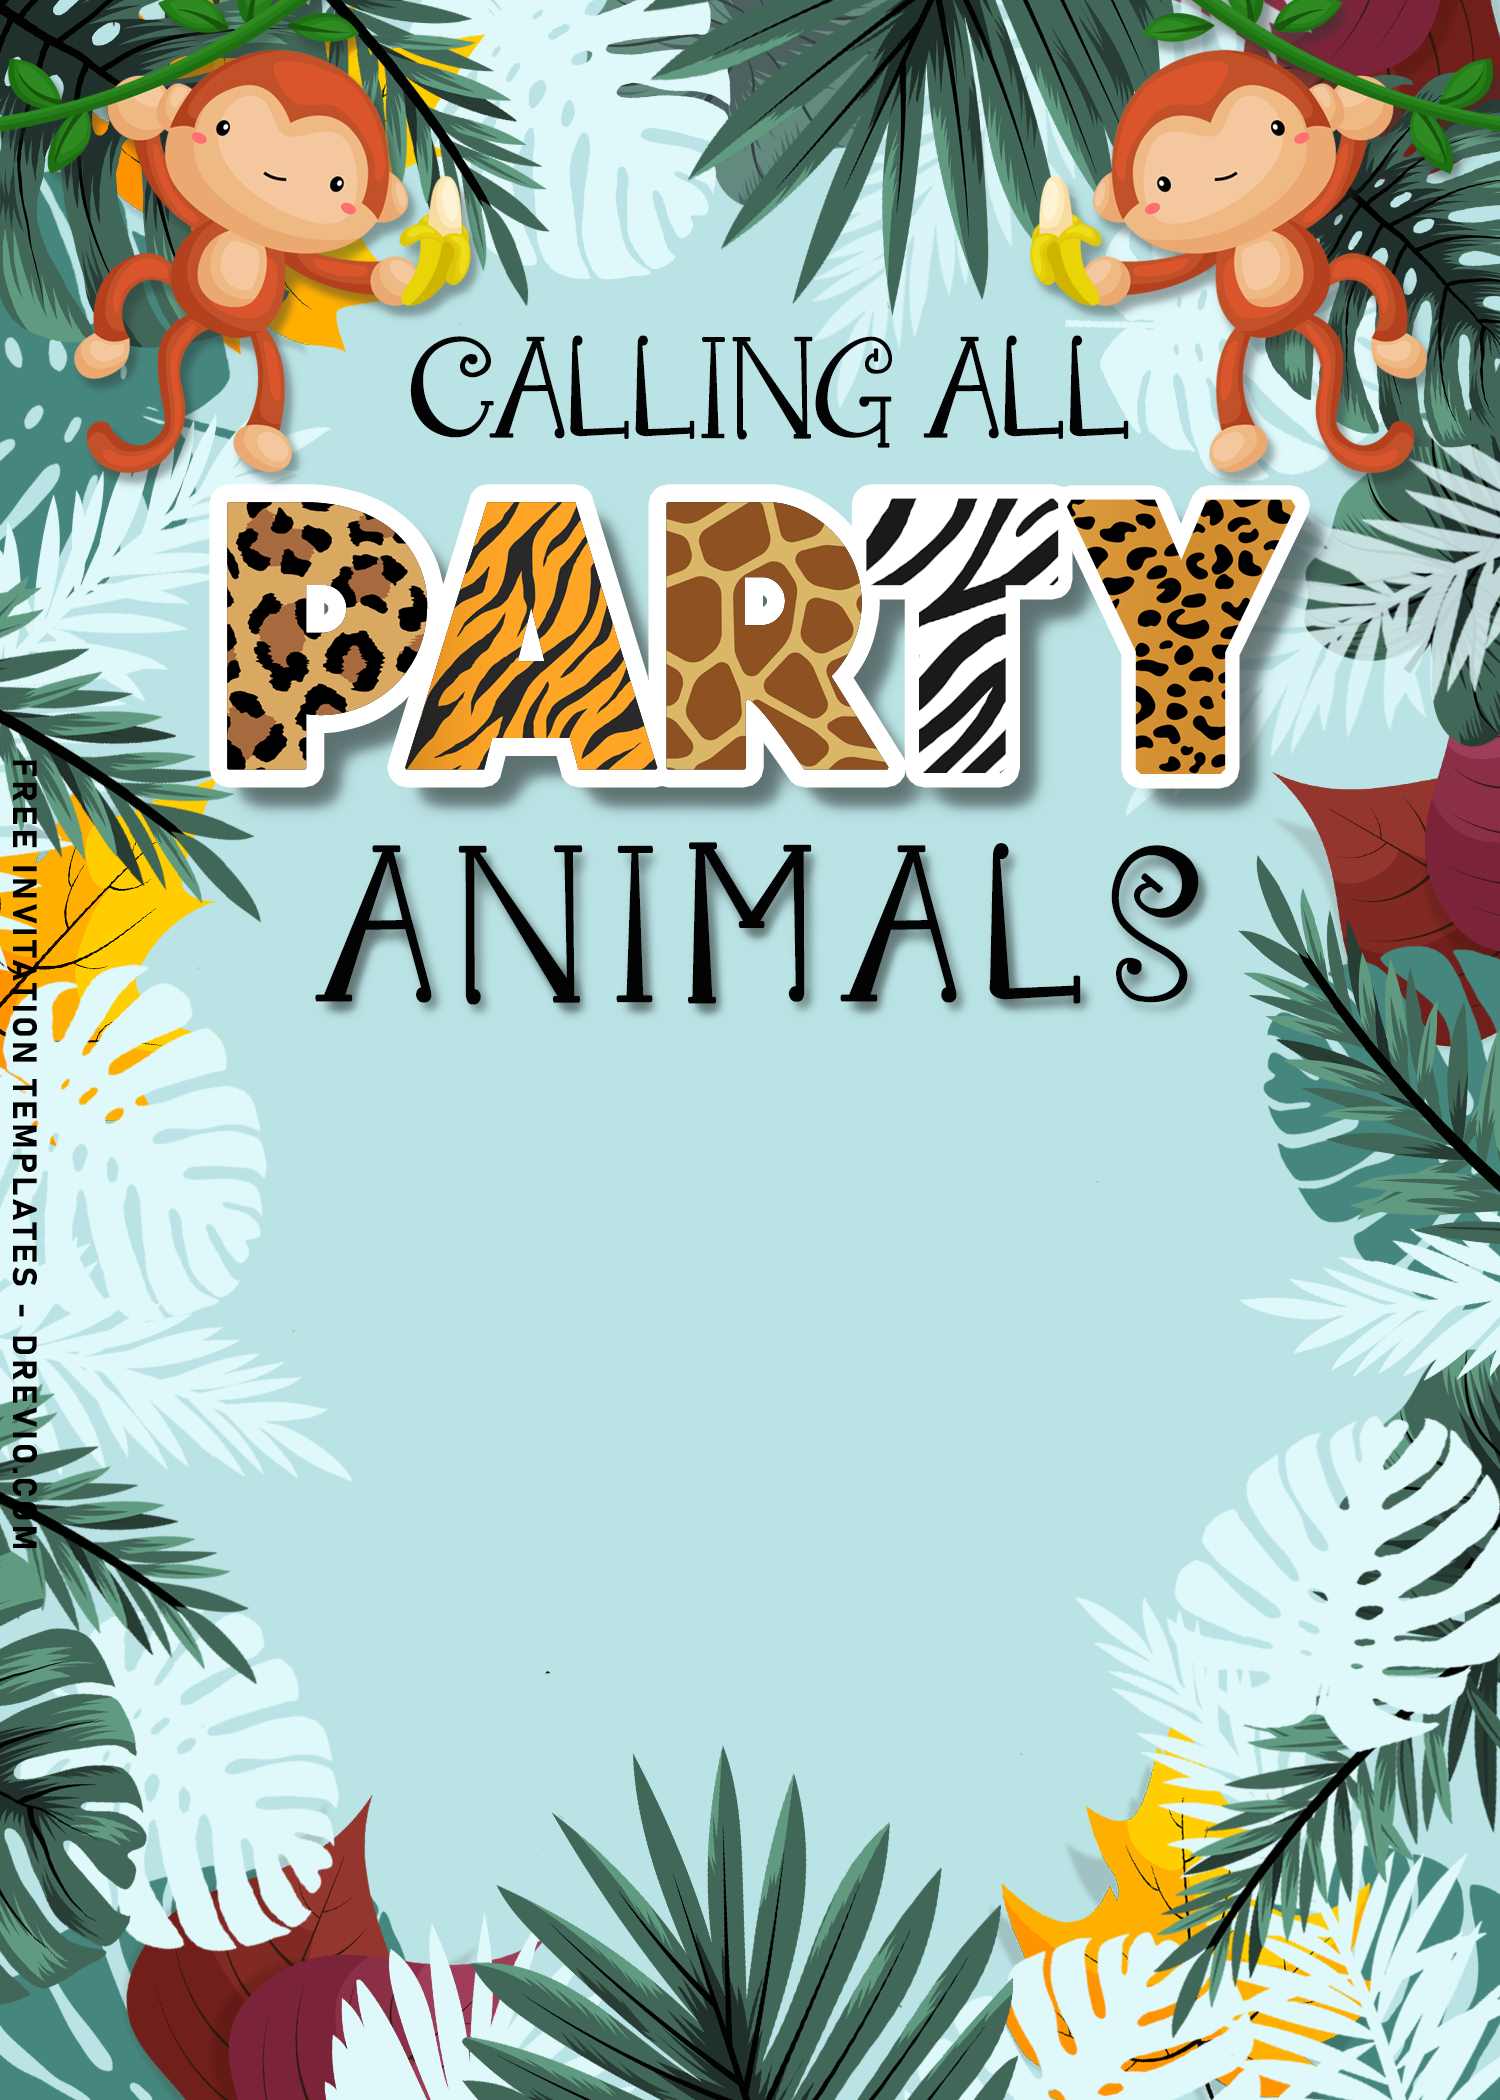 10 Best Party Animals Invitation Templates For Kids Birthday Party Download Hundreds FREE